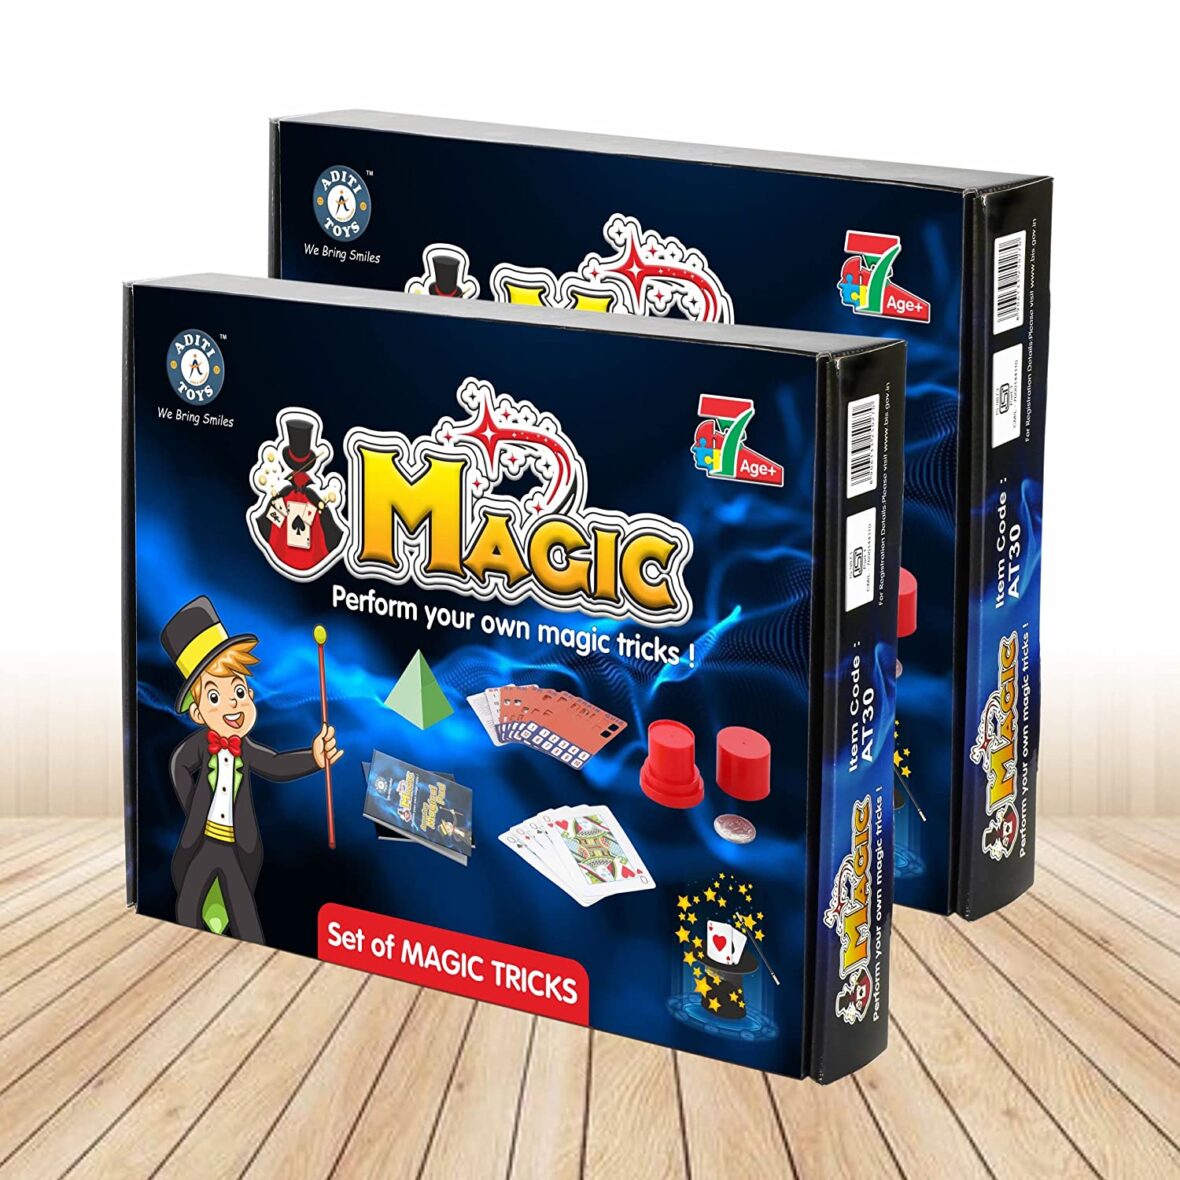 Magic Tricks Games to Perform 10+ Magic Tricks for Friends and Family